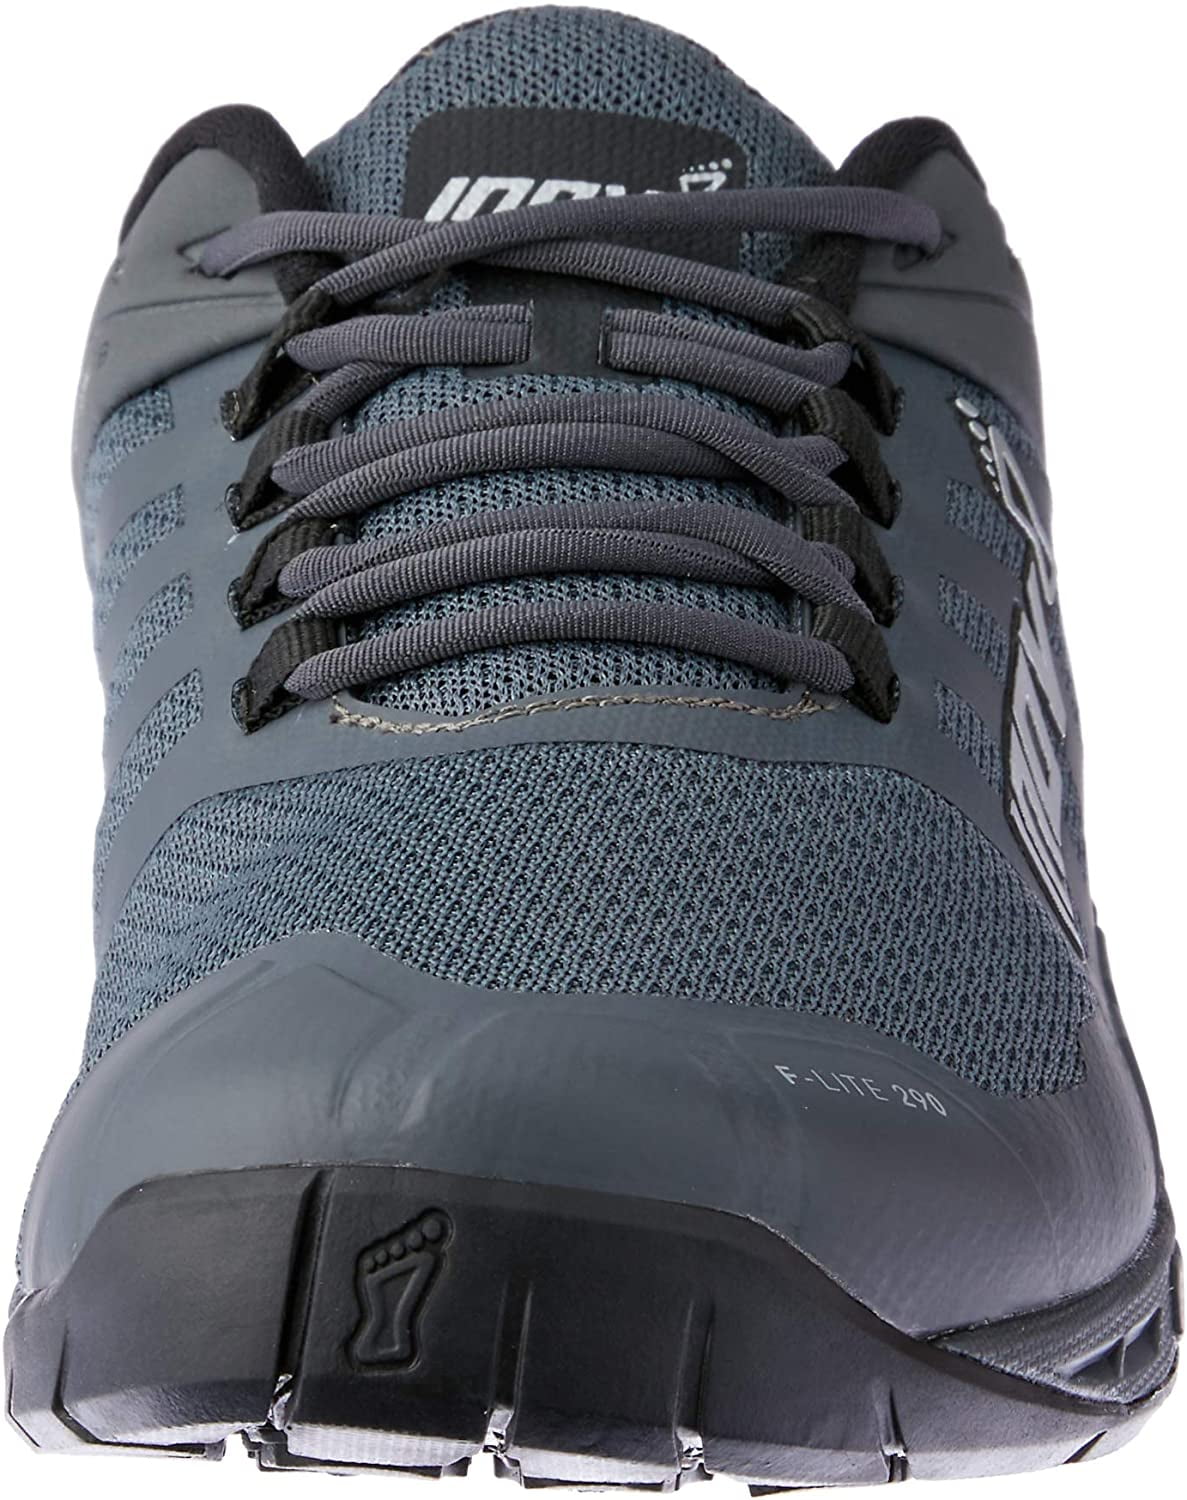 Power Heel Technology for Added Support When Weight Lifting Inov-8 Mens F-Lite 290 Super Versatile Cross Training Shoe